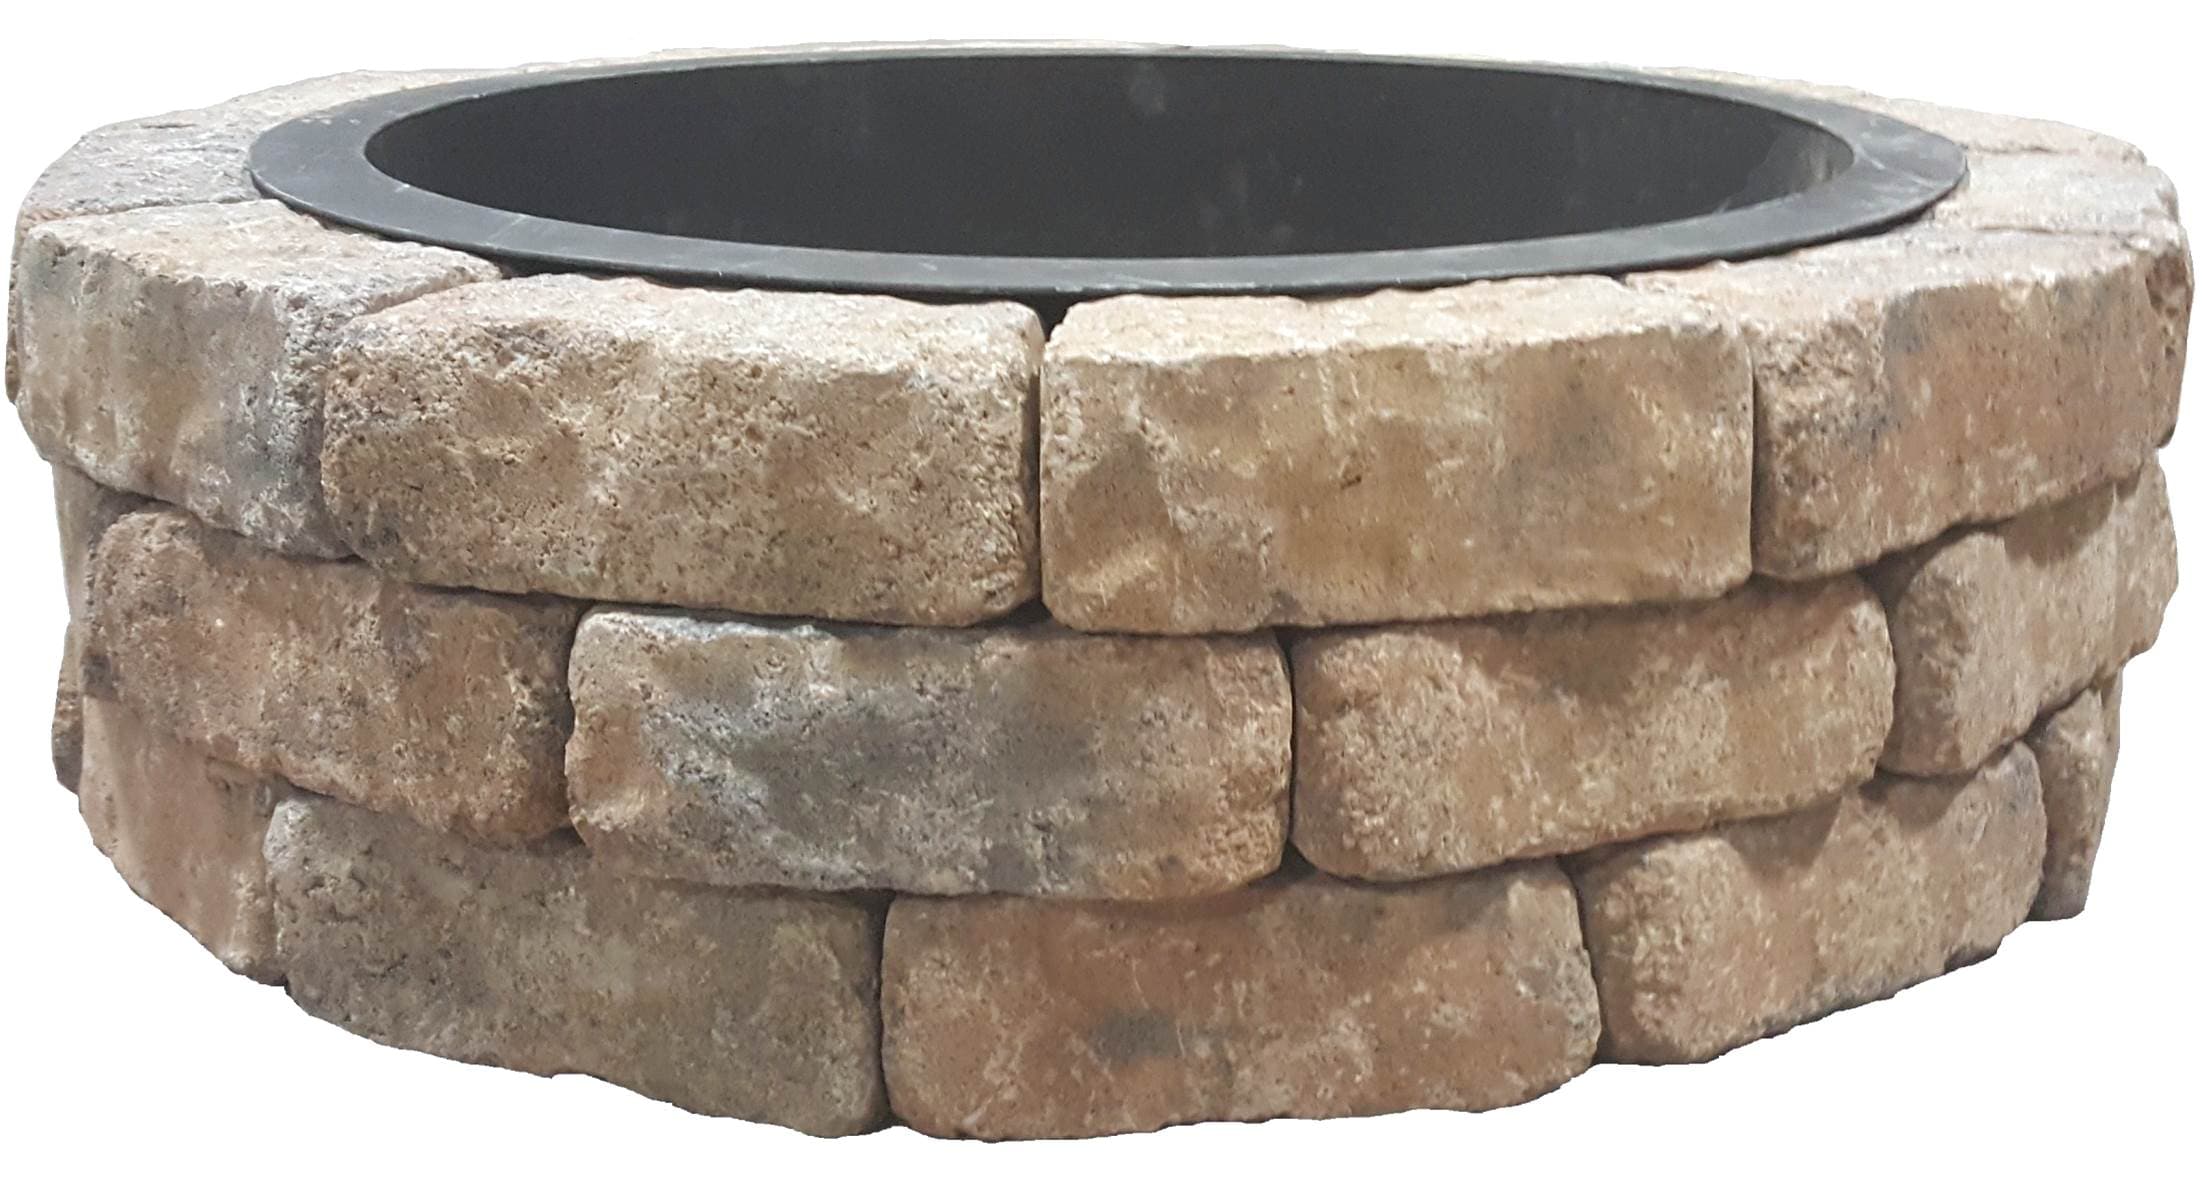 Natura wall firepit kit sahara sand 42-in x 12-in Concrete Fire Pit Kit in  the Fire Pit Project Kits department at Lowes.com